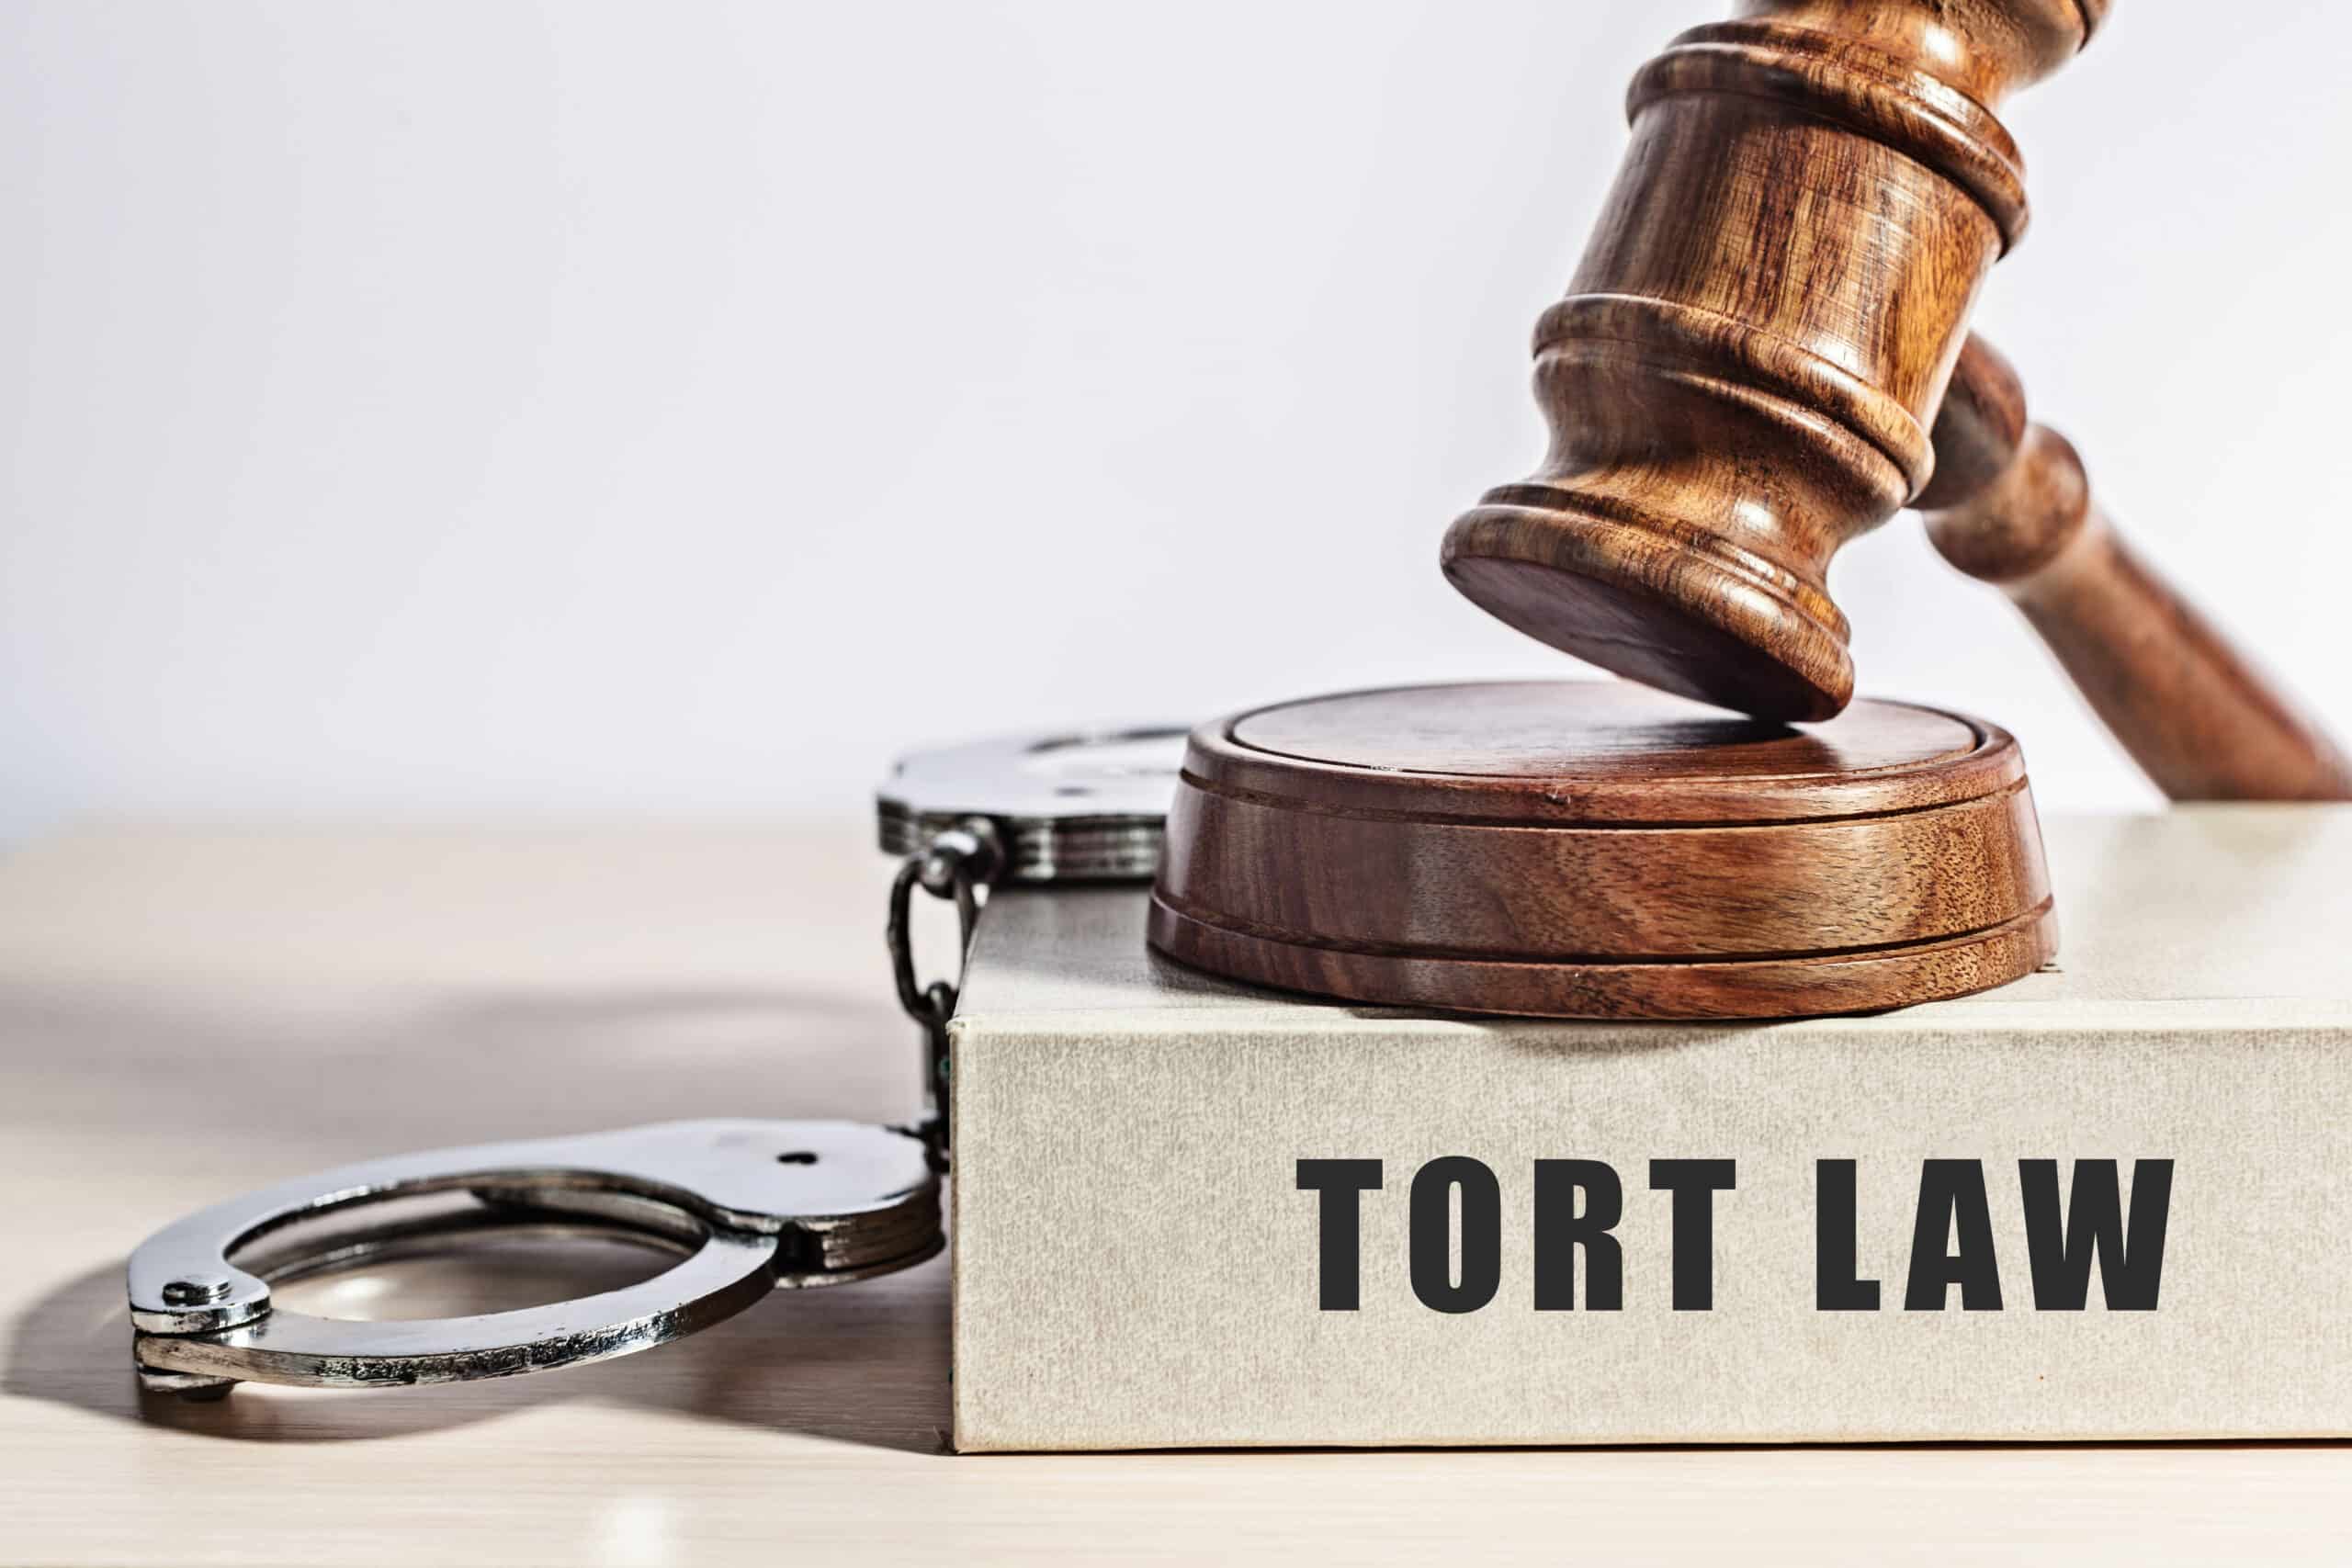 The Florida Legislature’s Latest Attempts at Tort Reform and How They Affect Personal Injury Cases